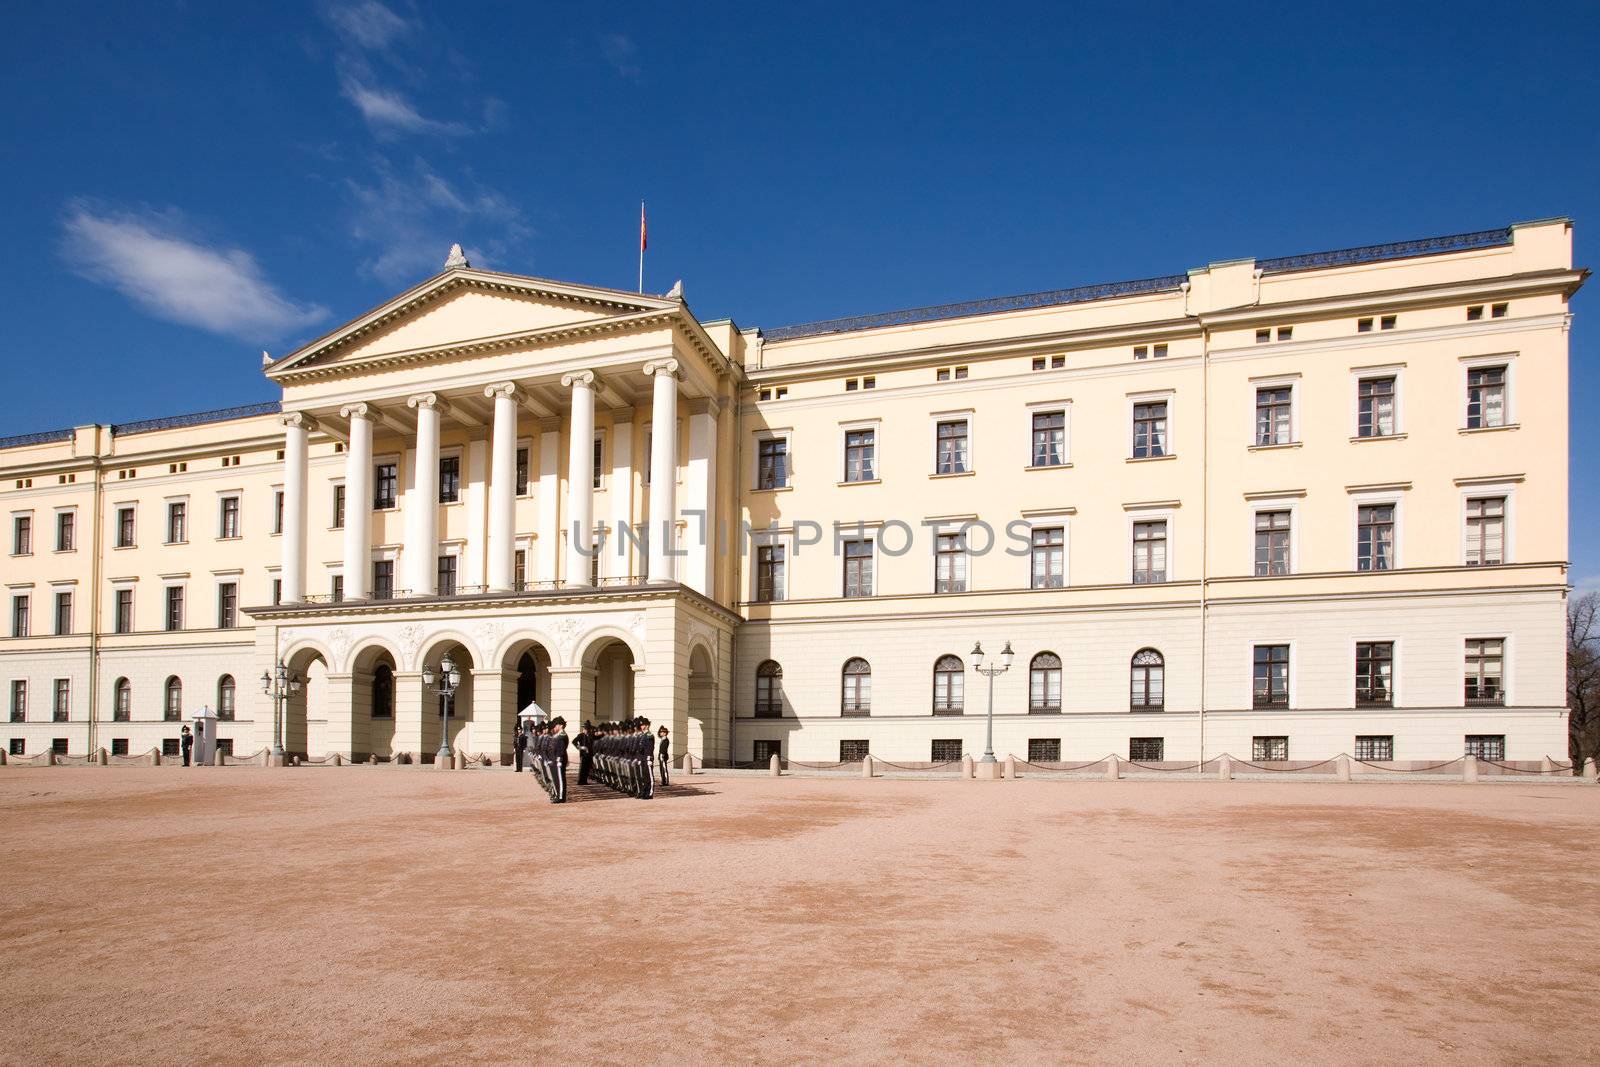 The Oslo Palace on a bright blue day waiting the arrival of a V.I.P.